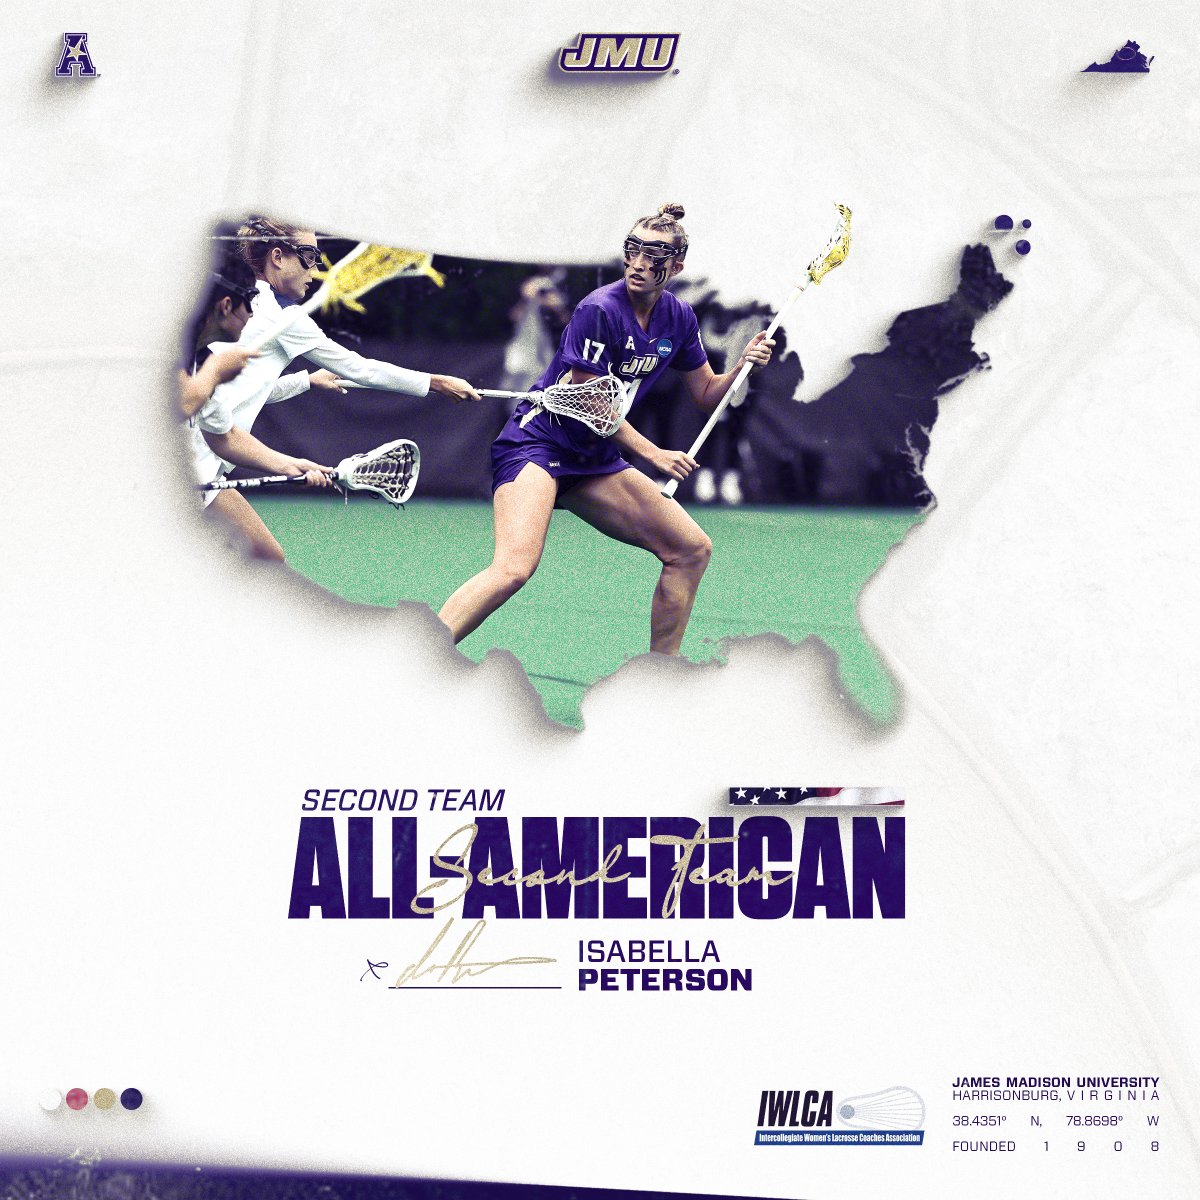 𝐈𝐖𝐋𝐂𝐀 𝐀𝐥𝐥-𝐀𝐦𝐞𝐫𝐢𝐜𝐚𝐧 🇺🇸

Isabella Peterson has been named an IWLCA Second Team All-American, her third All-American honor of the season!

📰 bit.ly/451WM5d

#GoDukes